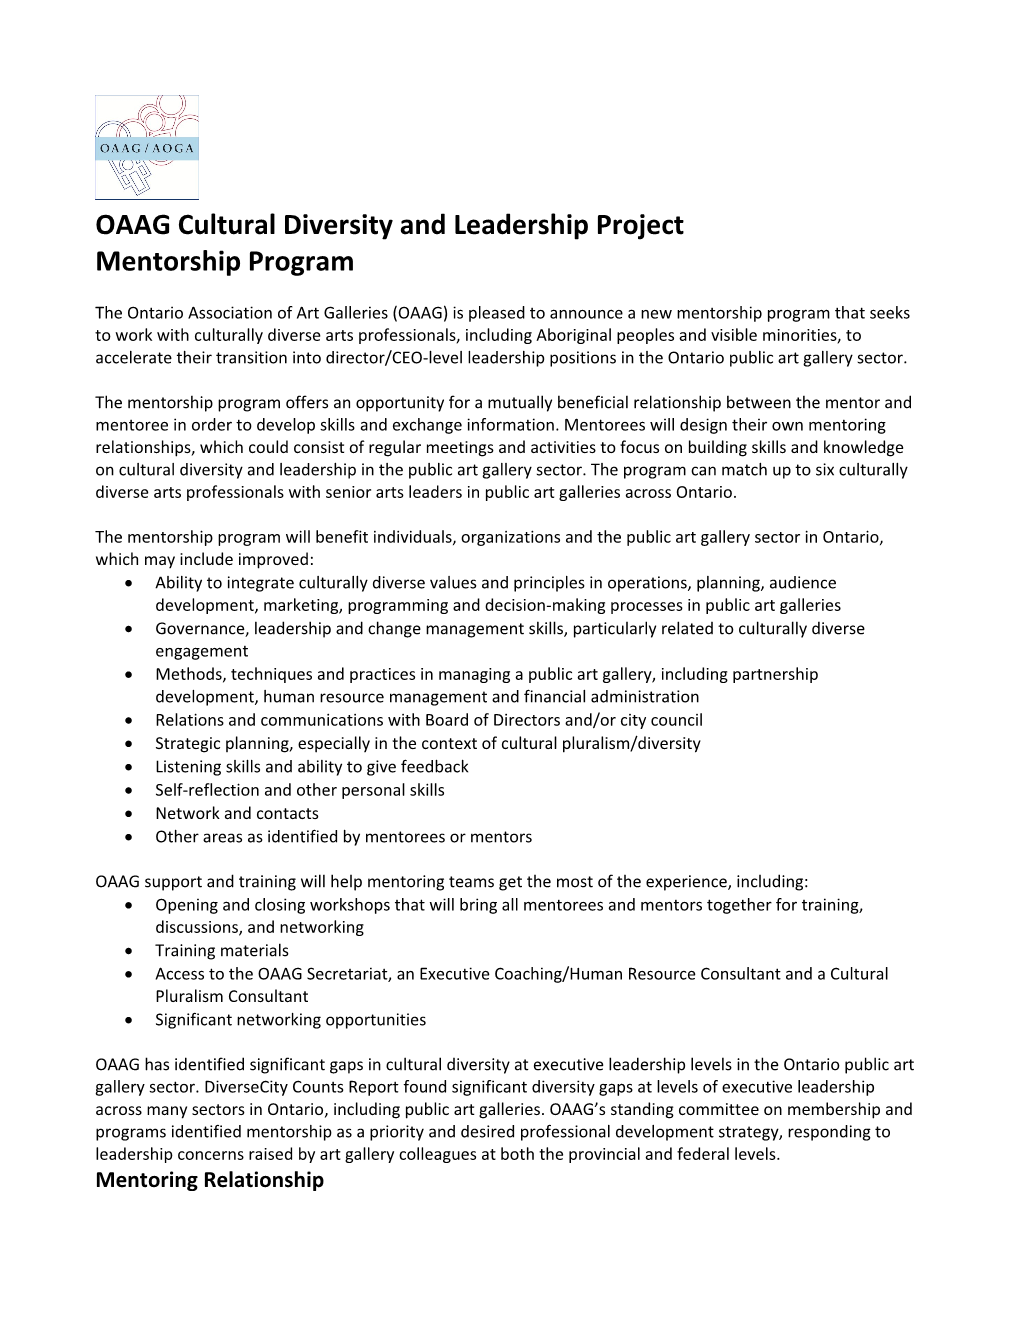 OAAG Cultural Diversity and Leadership Project